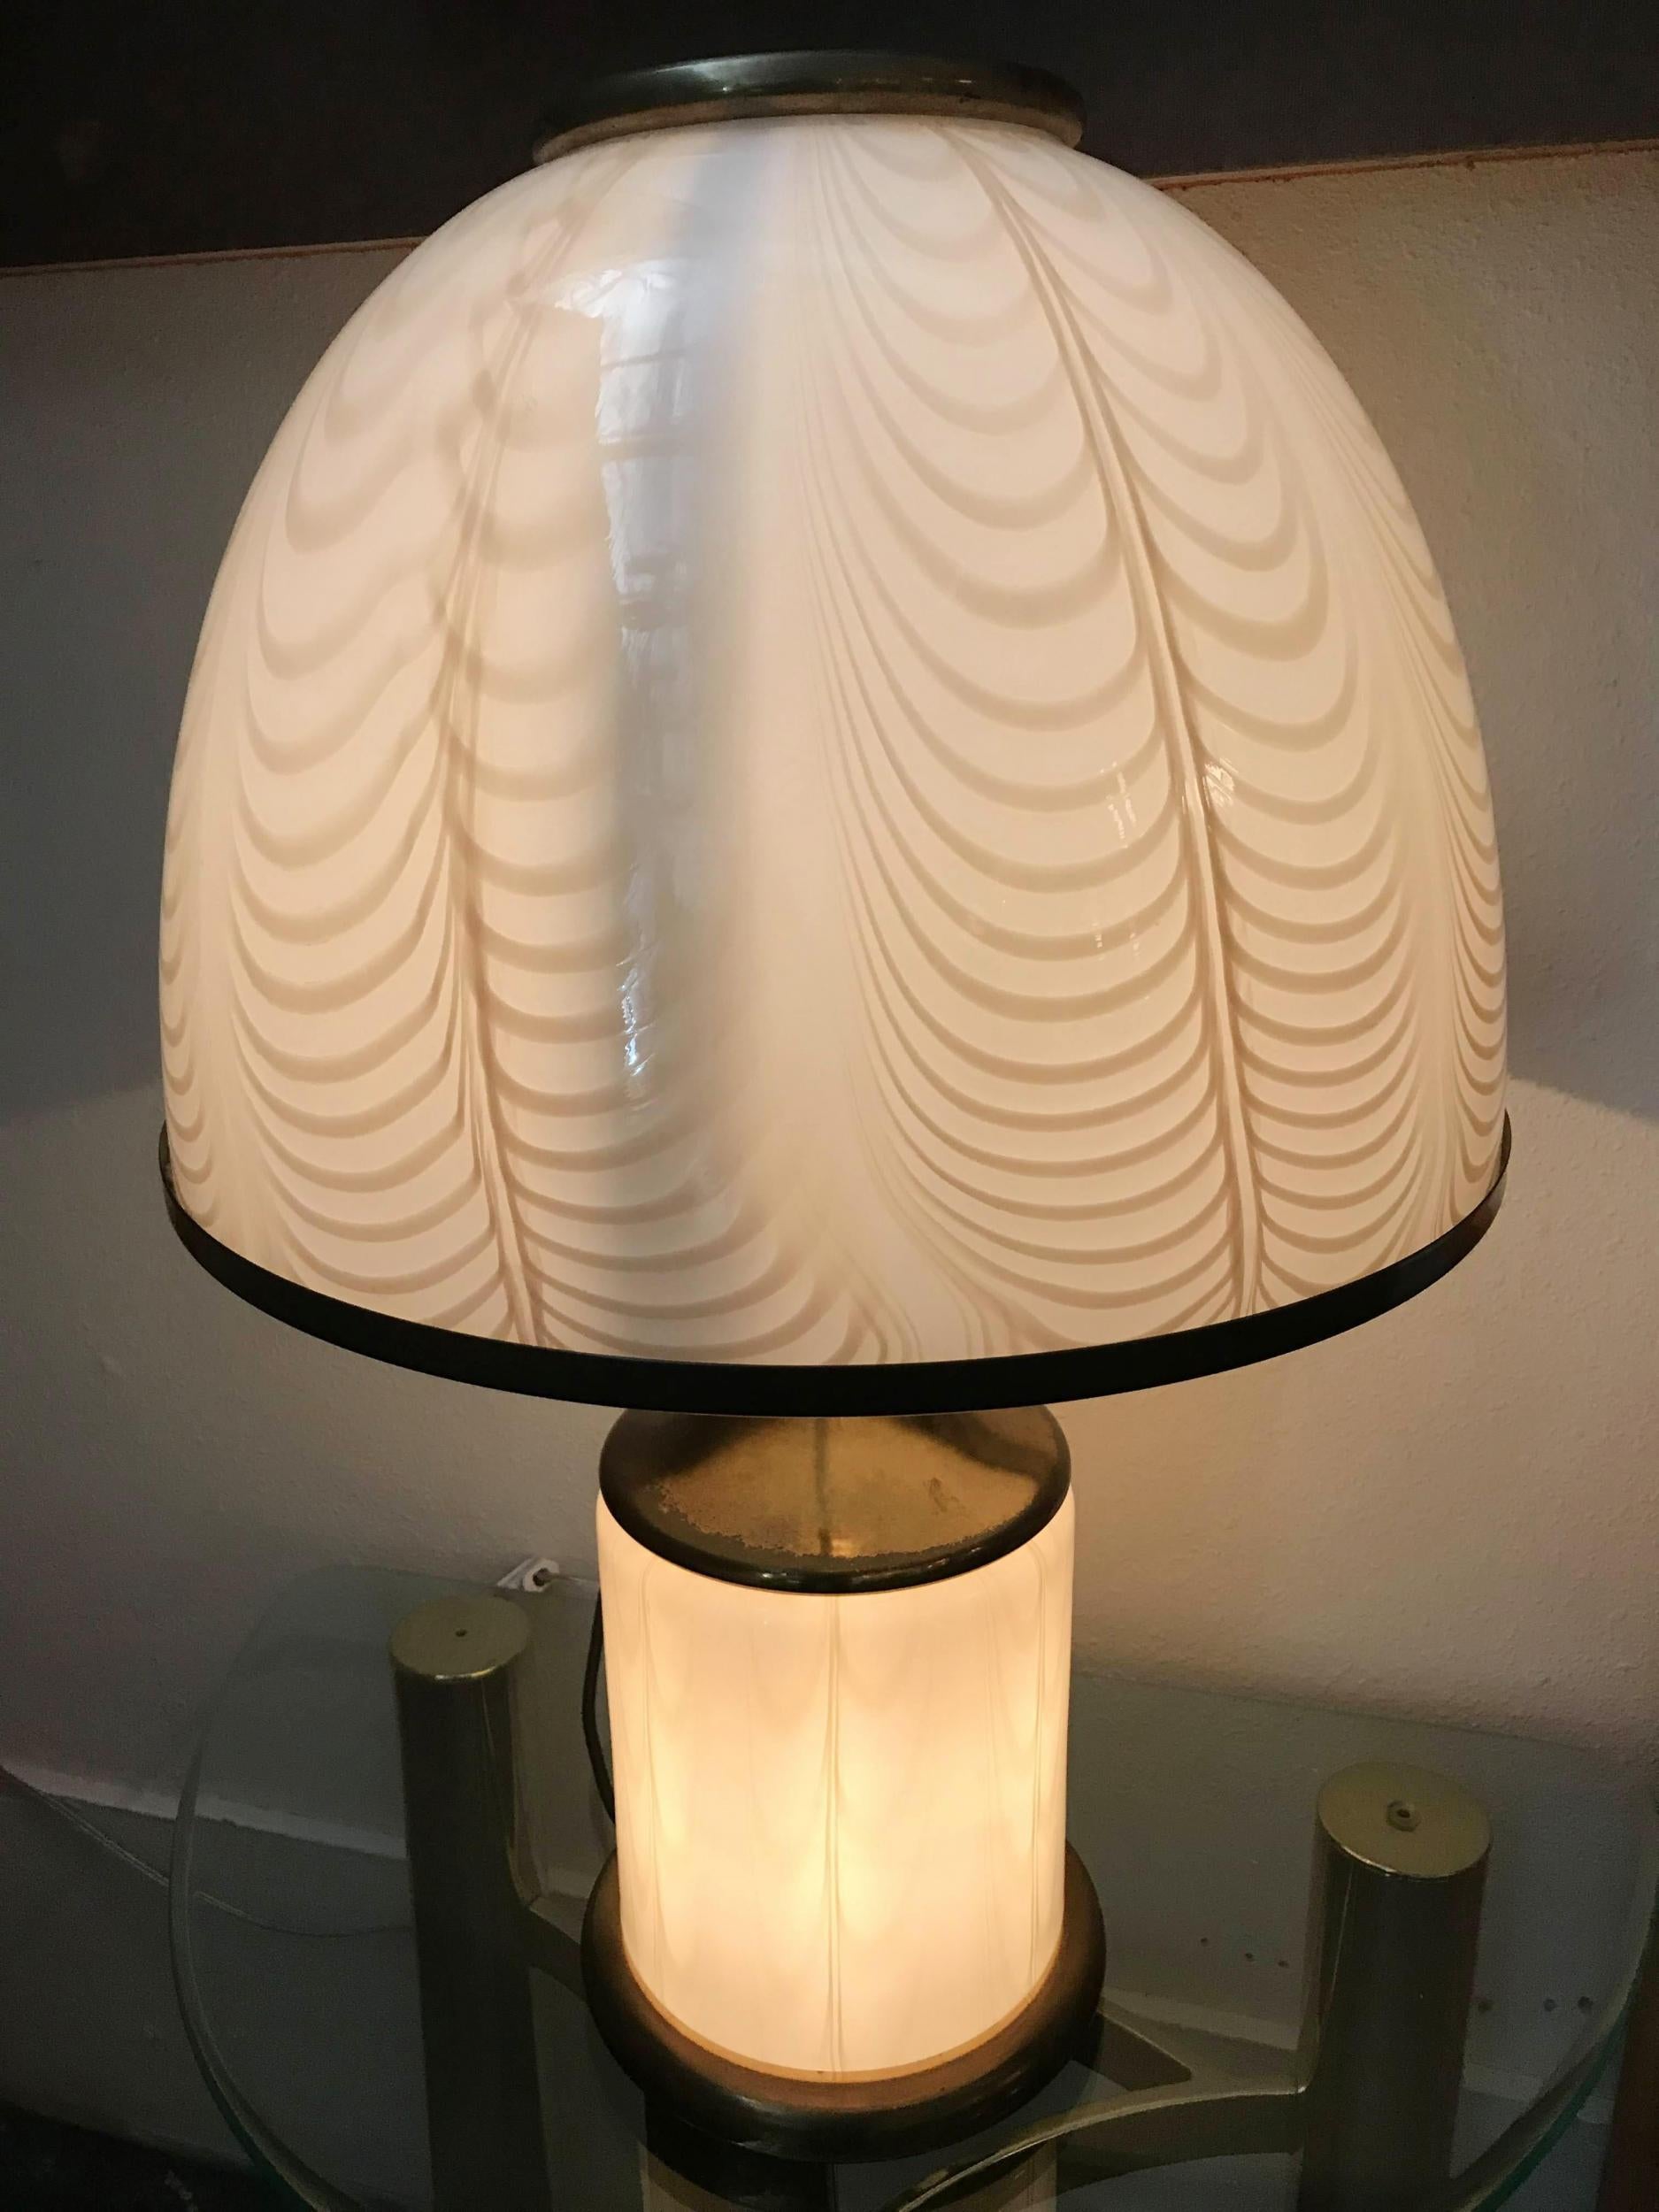 Italian vintage table lamp with cream colored Murano glass decorated with amber feather-shaped details on brass hardware, by F. Fabbian for Mazzega, made in Italy in the 1970s 

2-light / 1 in the shade and 1 in the base.